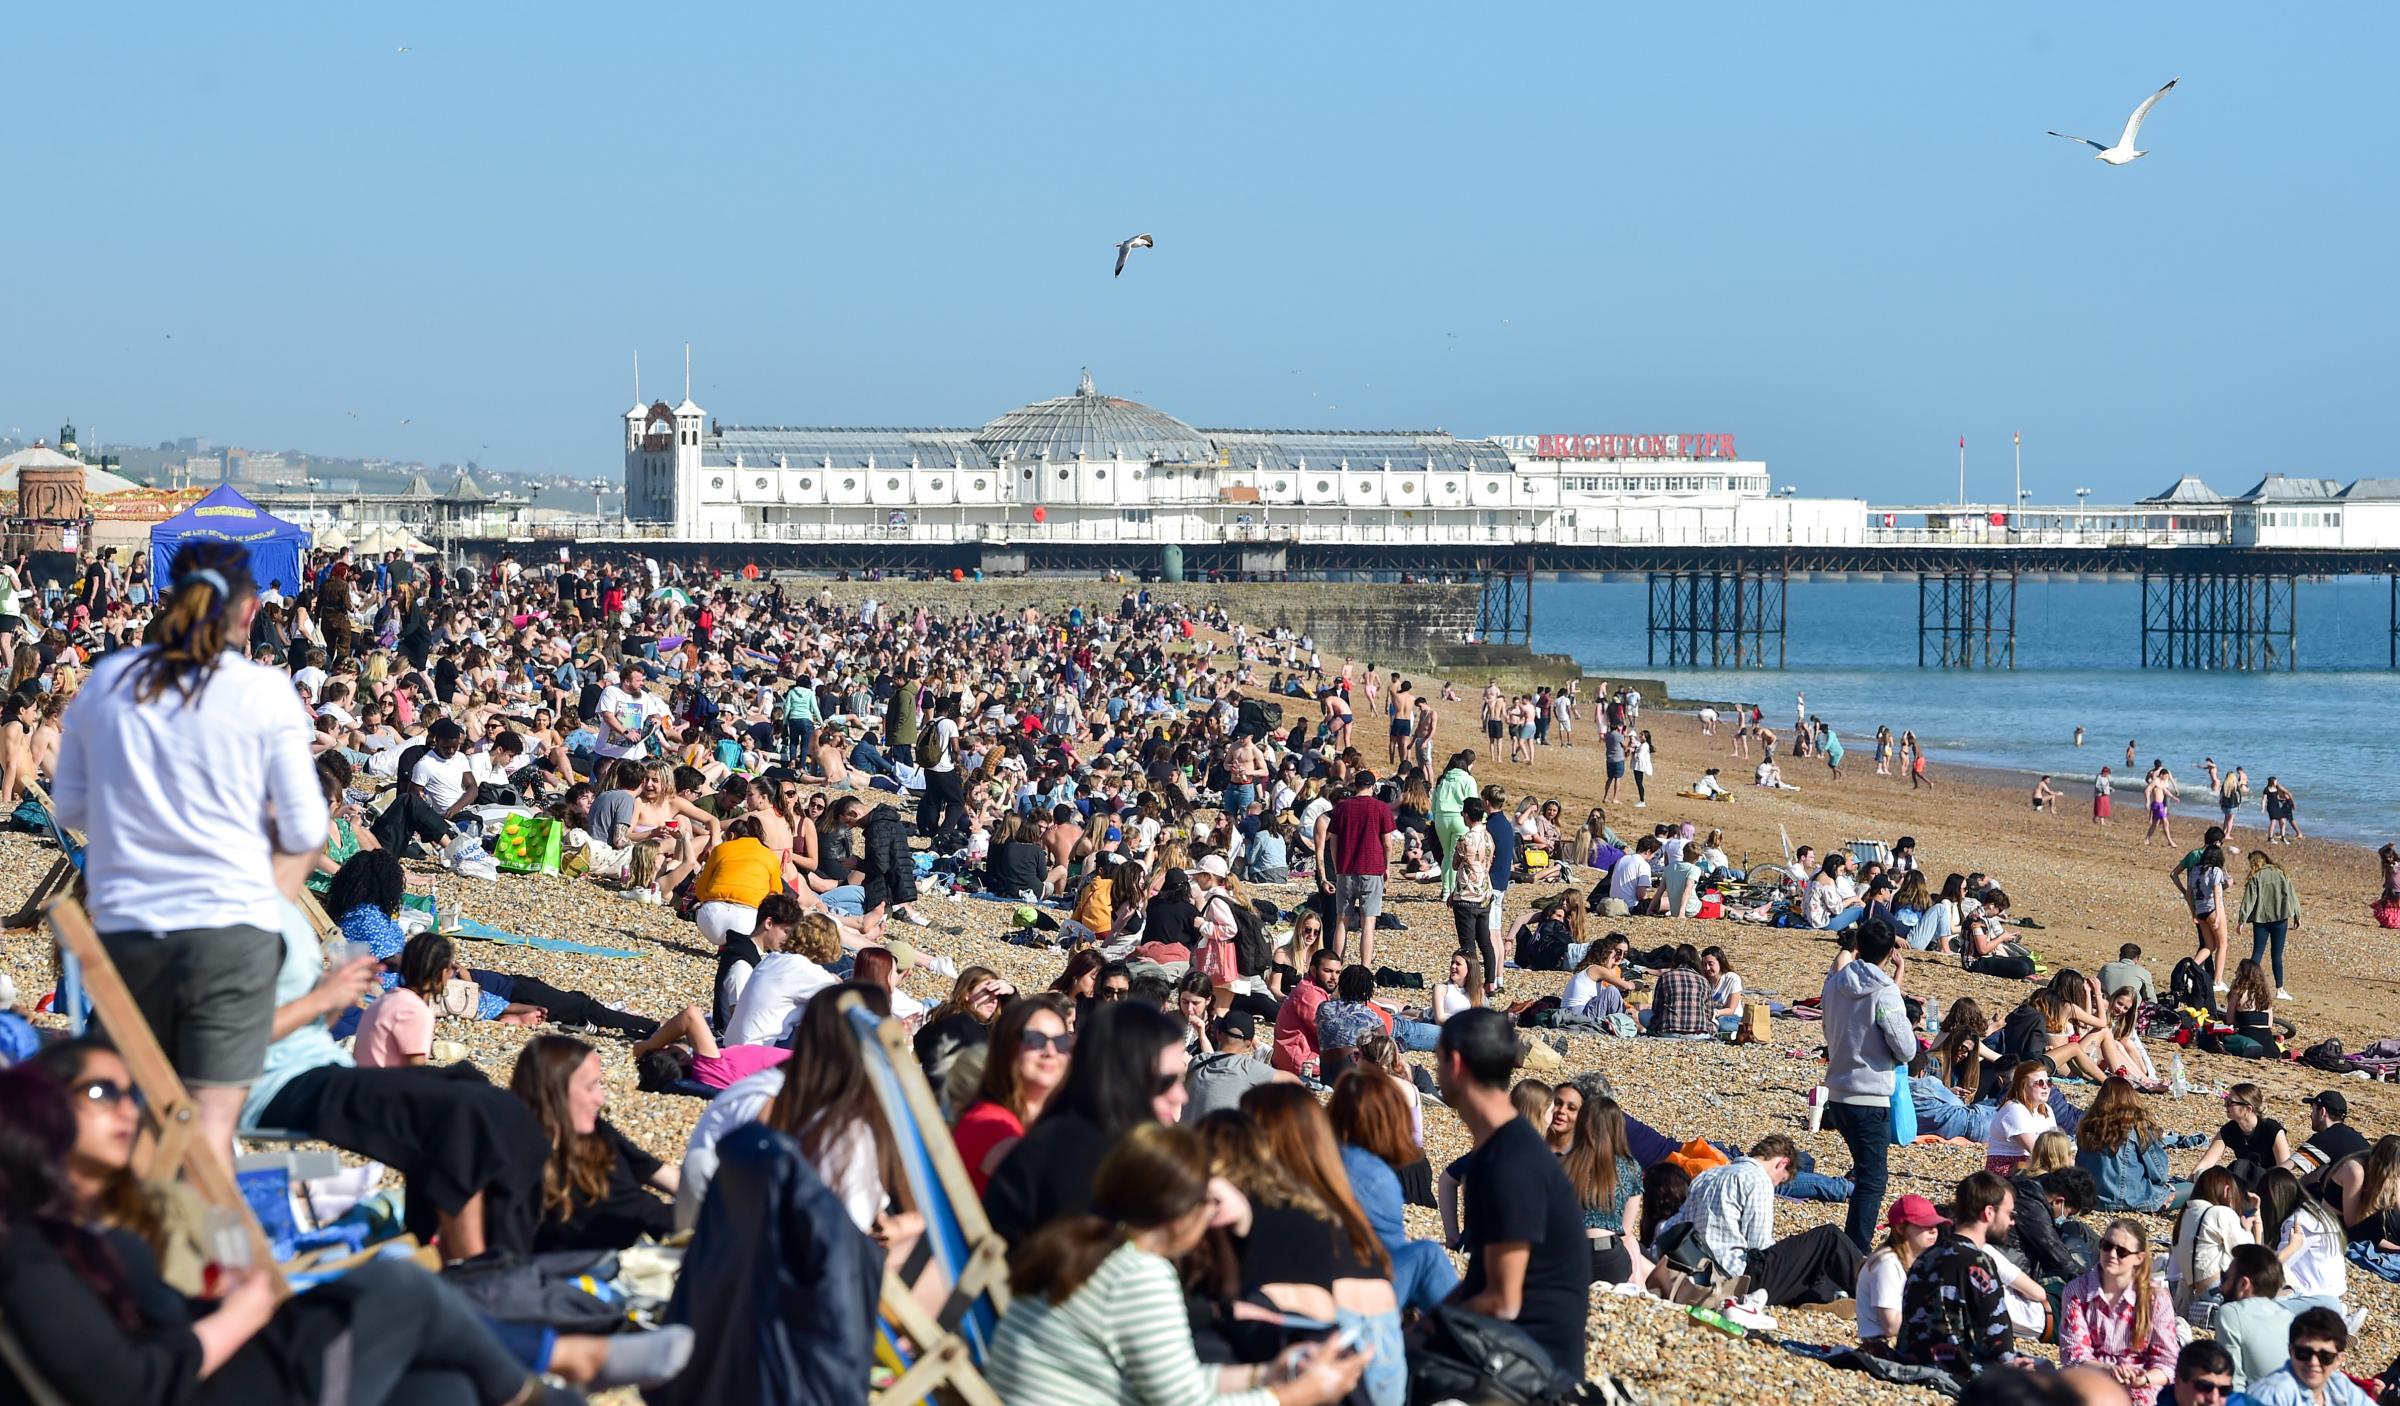 Brighton UK 30th March 2021 - Brighton beach is packed as visitors flock to the seaside on the hottest day of the year so far with temperatures reaching the mid 20s centigrade in parts of the South East : Credit Simon Dack / Alamy Live News.........